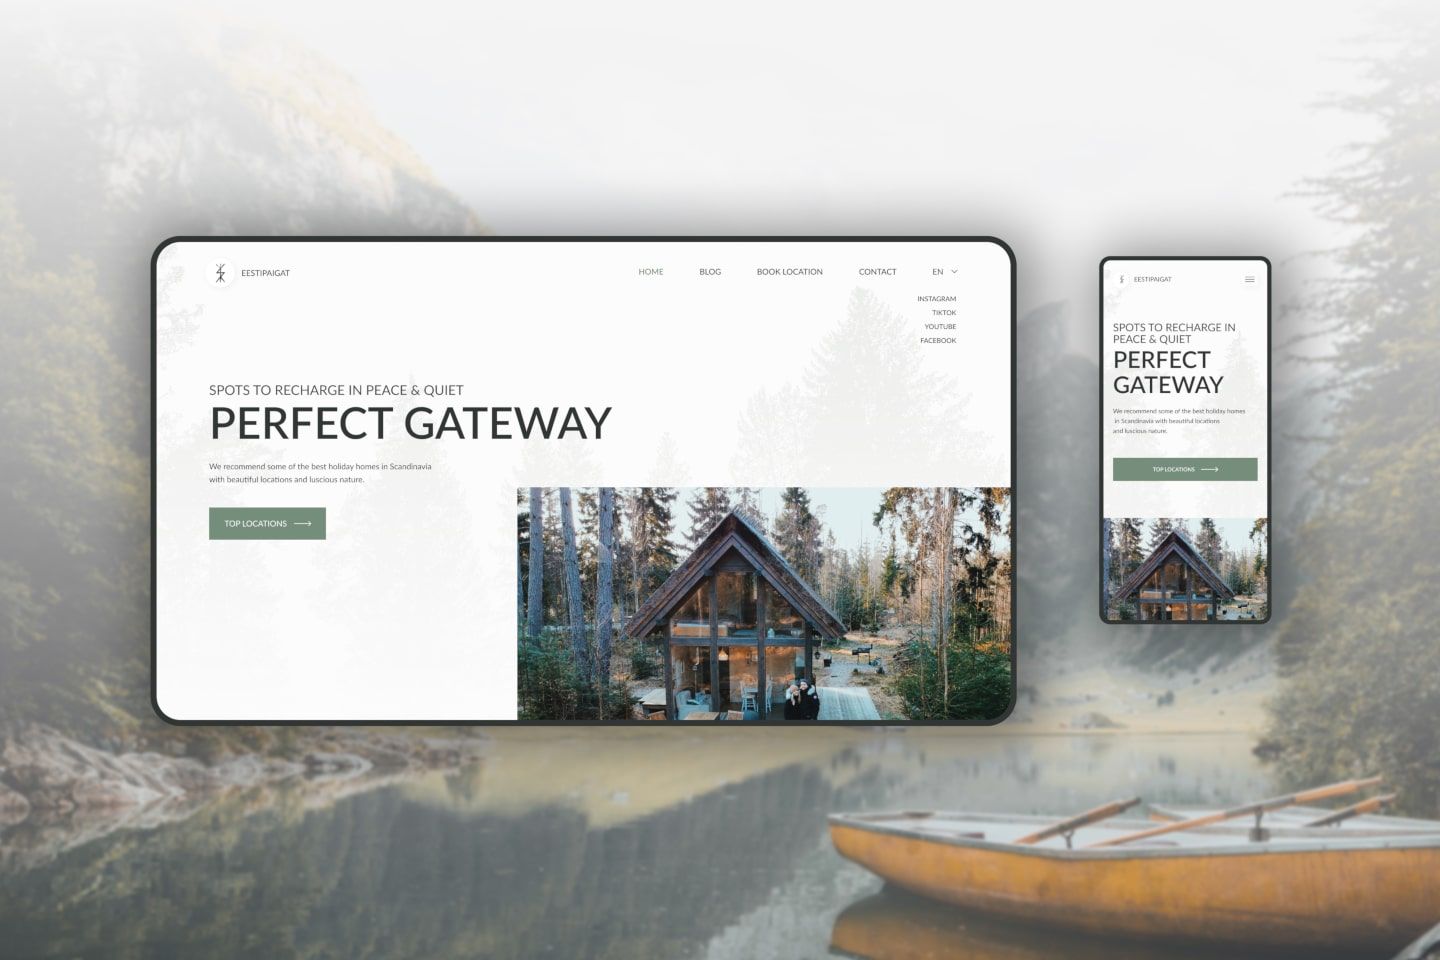 Travel page banner view mockup showing perfect gateway location